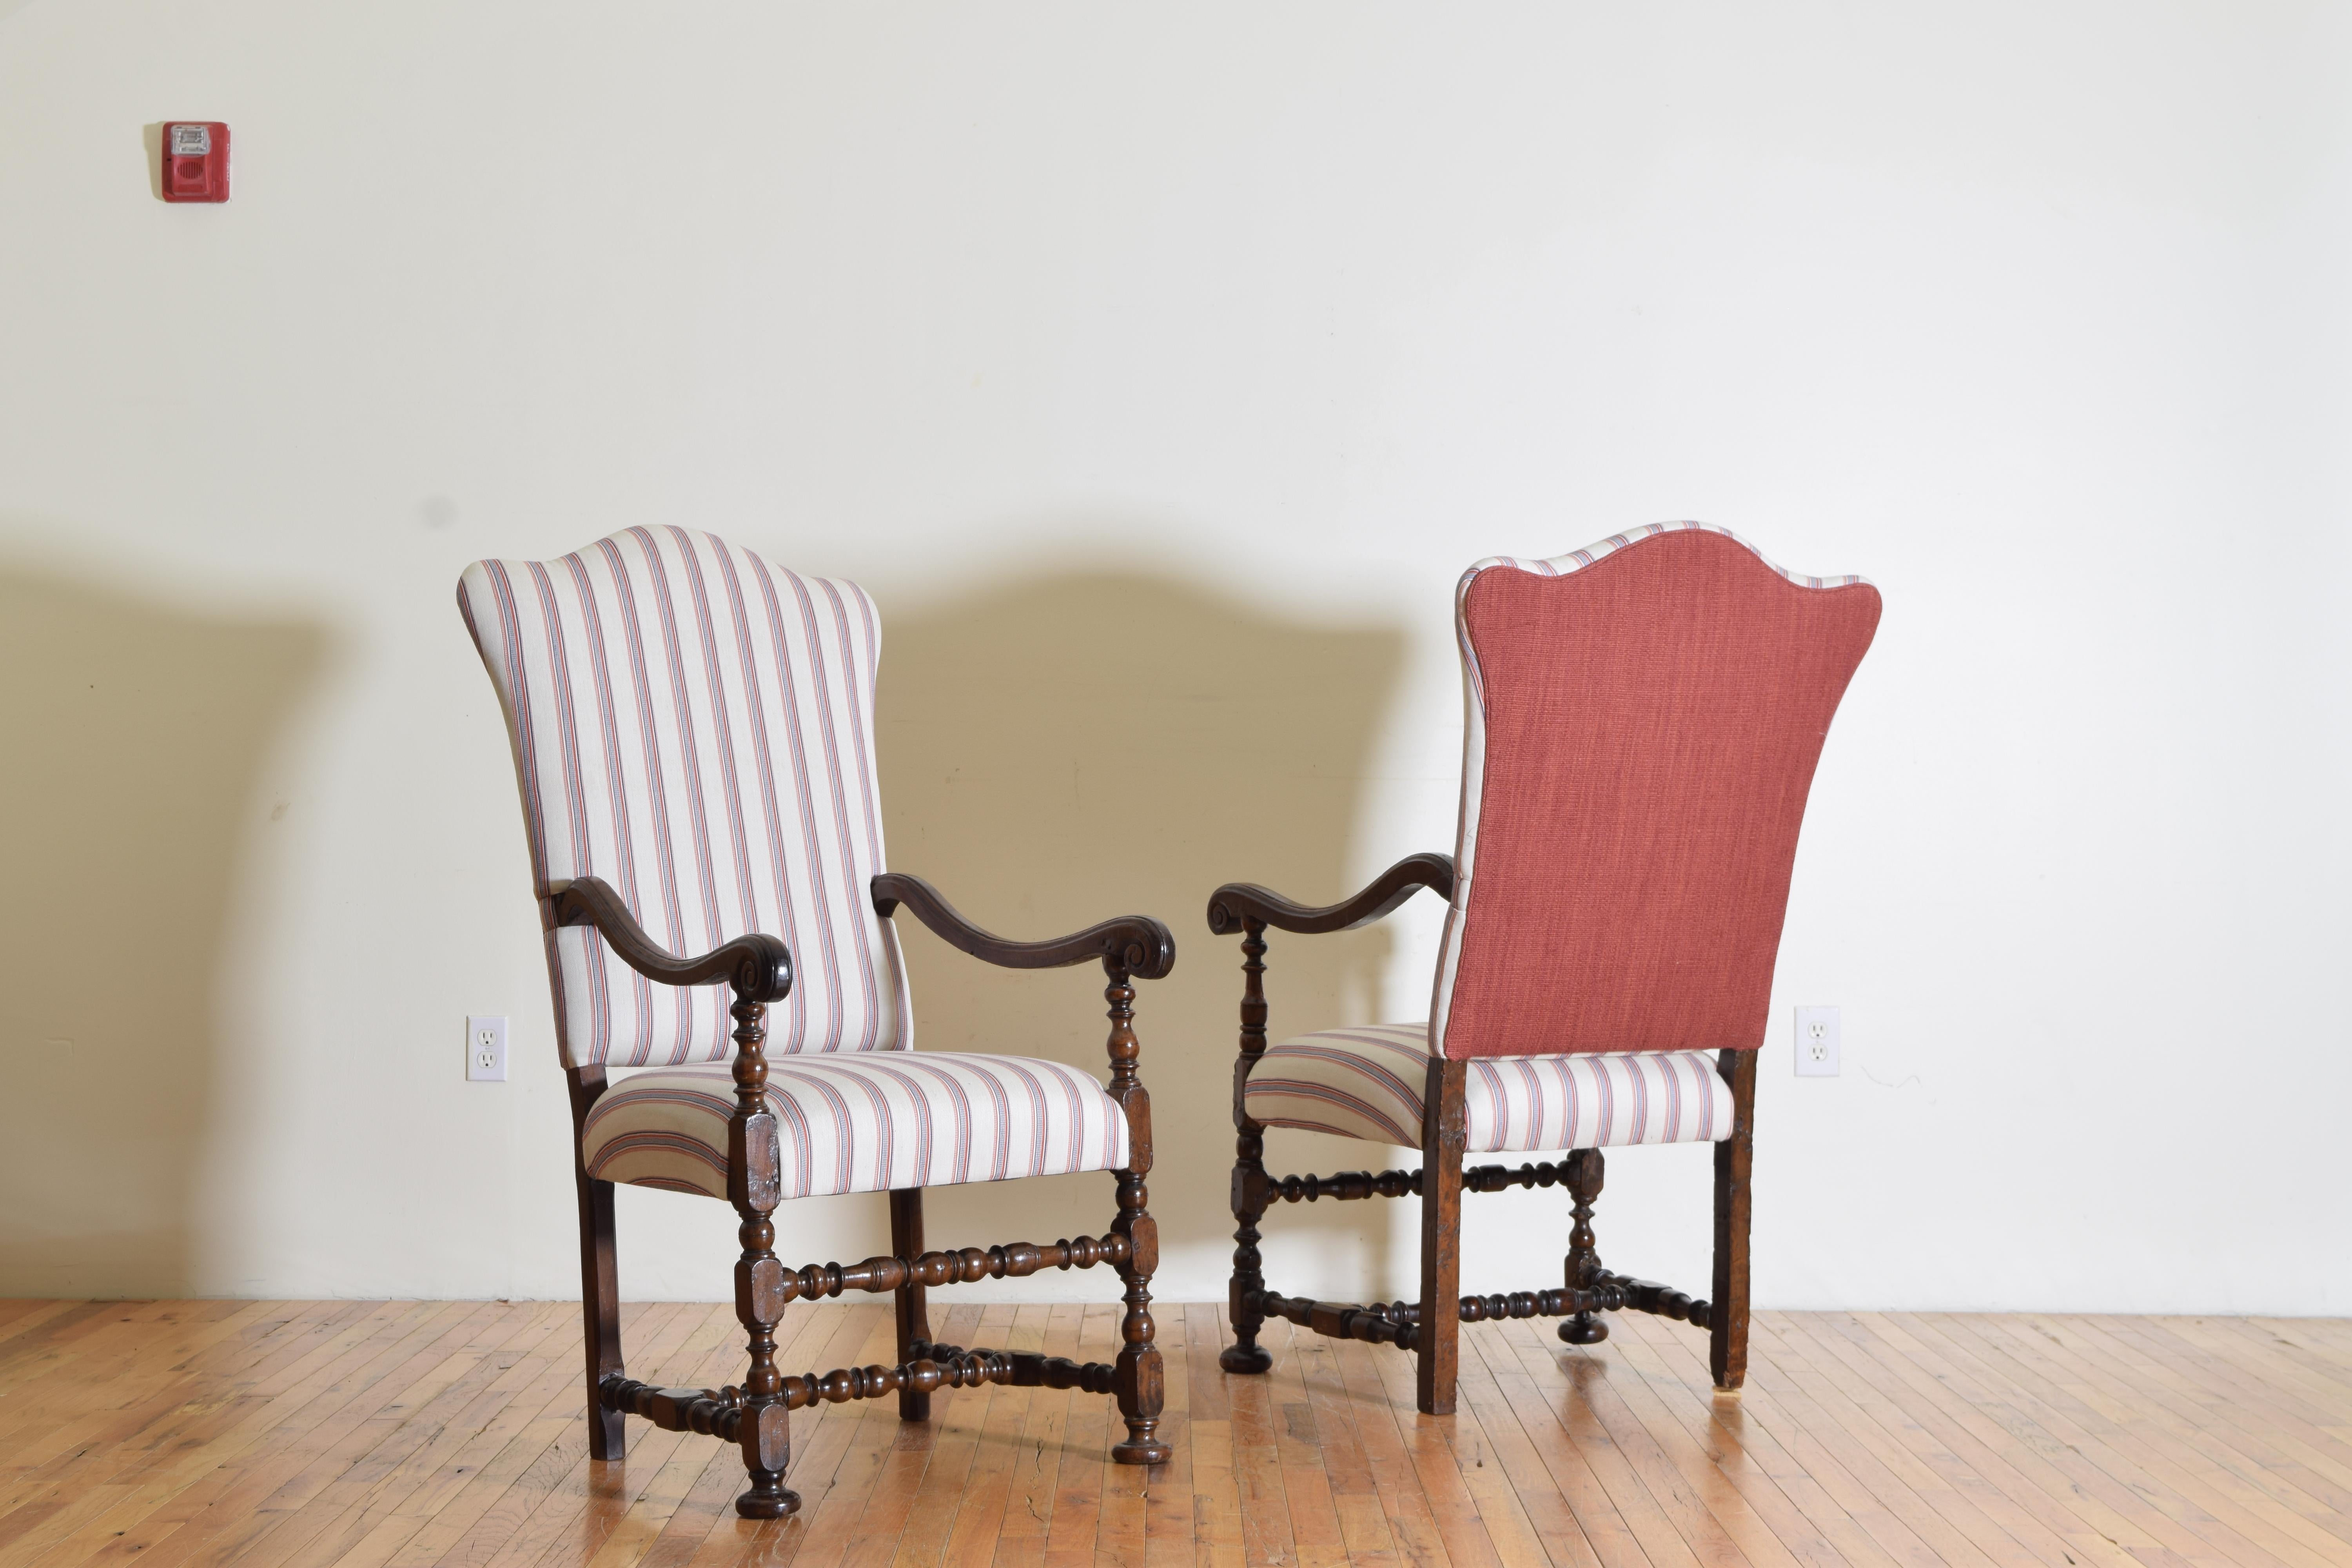 A handsome pair of finely carved and highly styled armchairs with etching on the arms where the walnut meets the backs. Newly upholstered and strengthened.